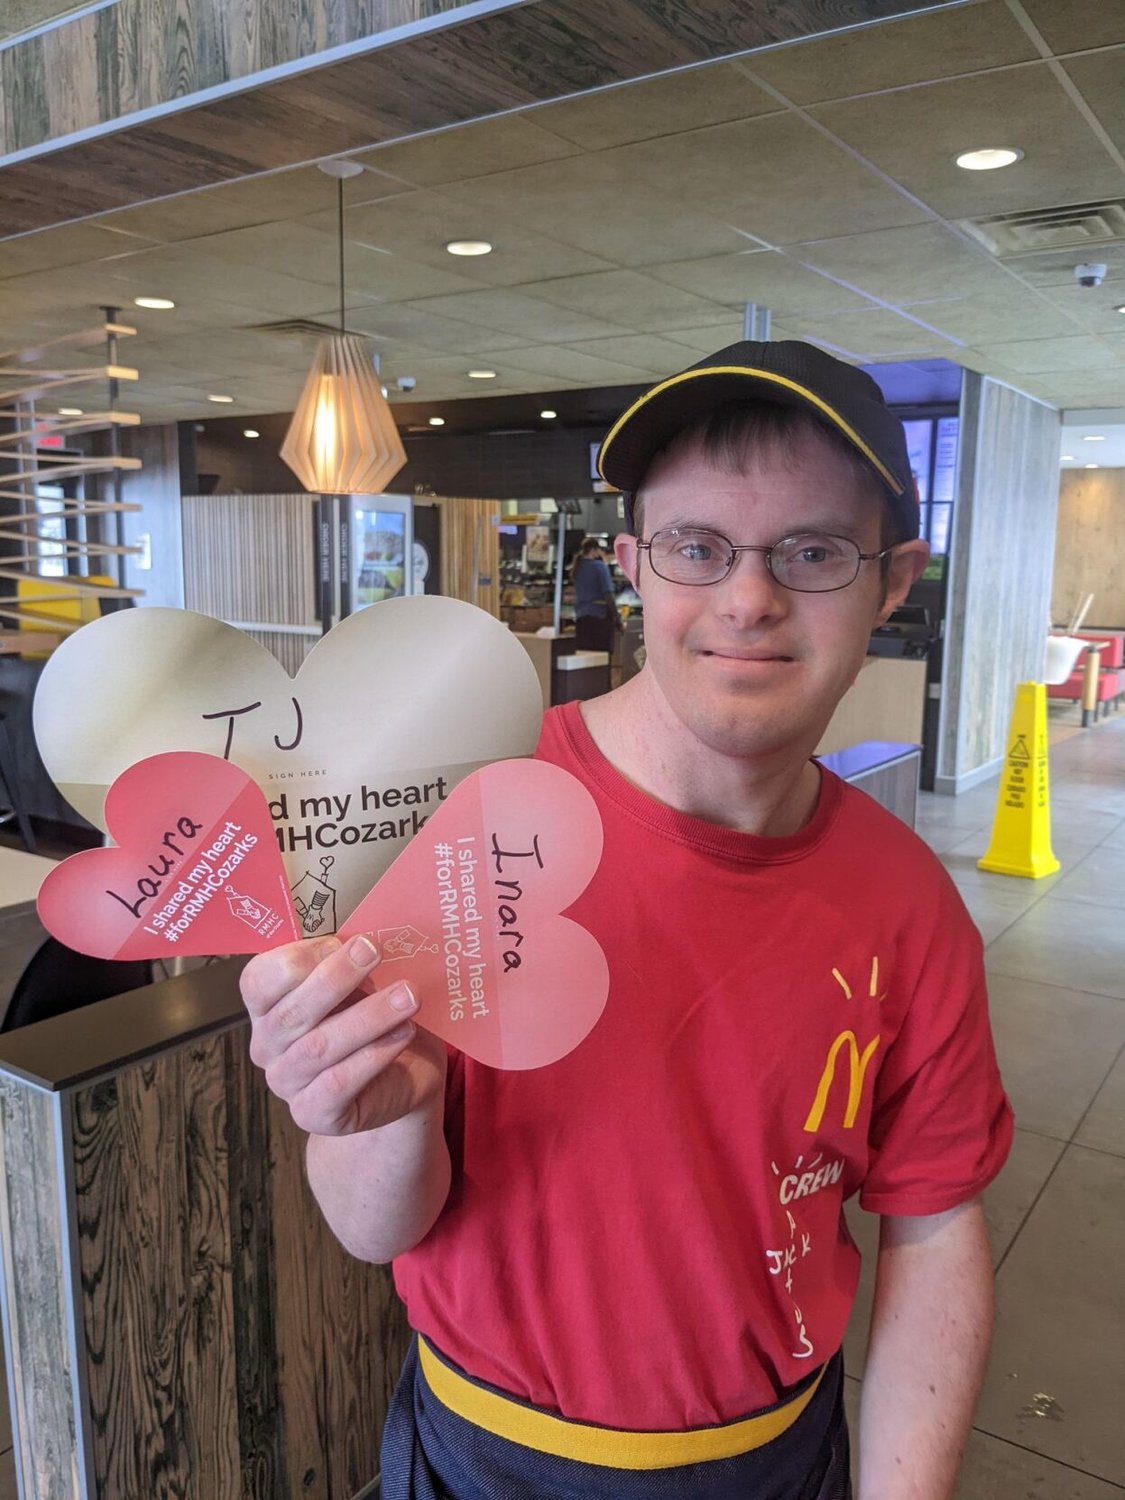 TJ Slocum, of Marshfield, is celebrating his 16th year as a Share a Heart Champion.